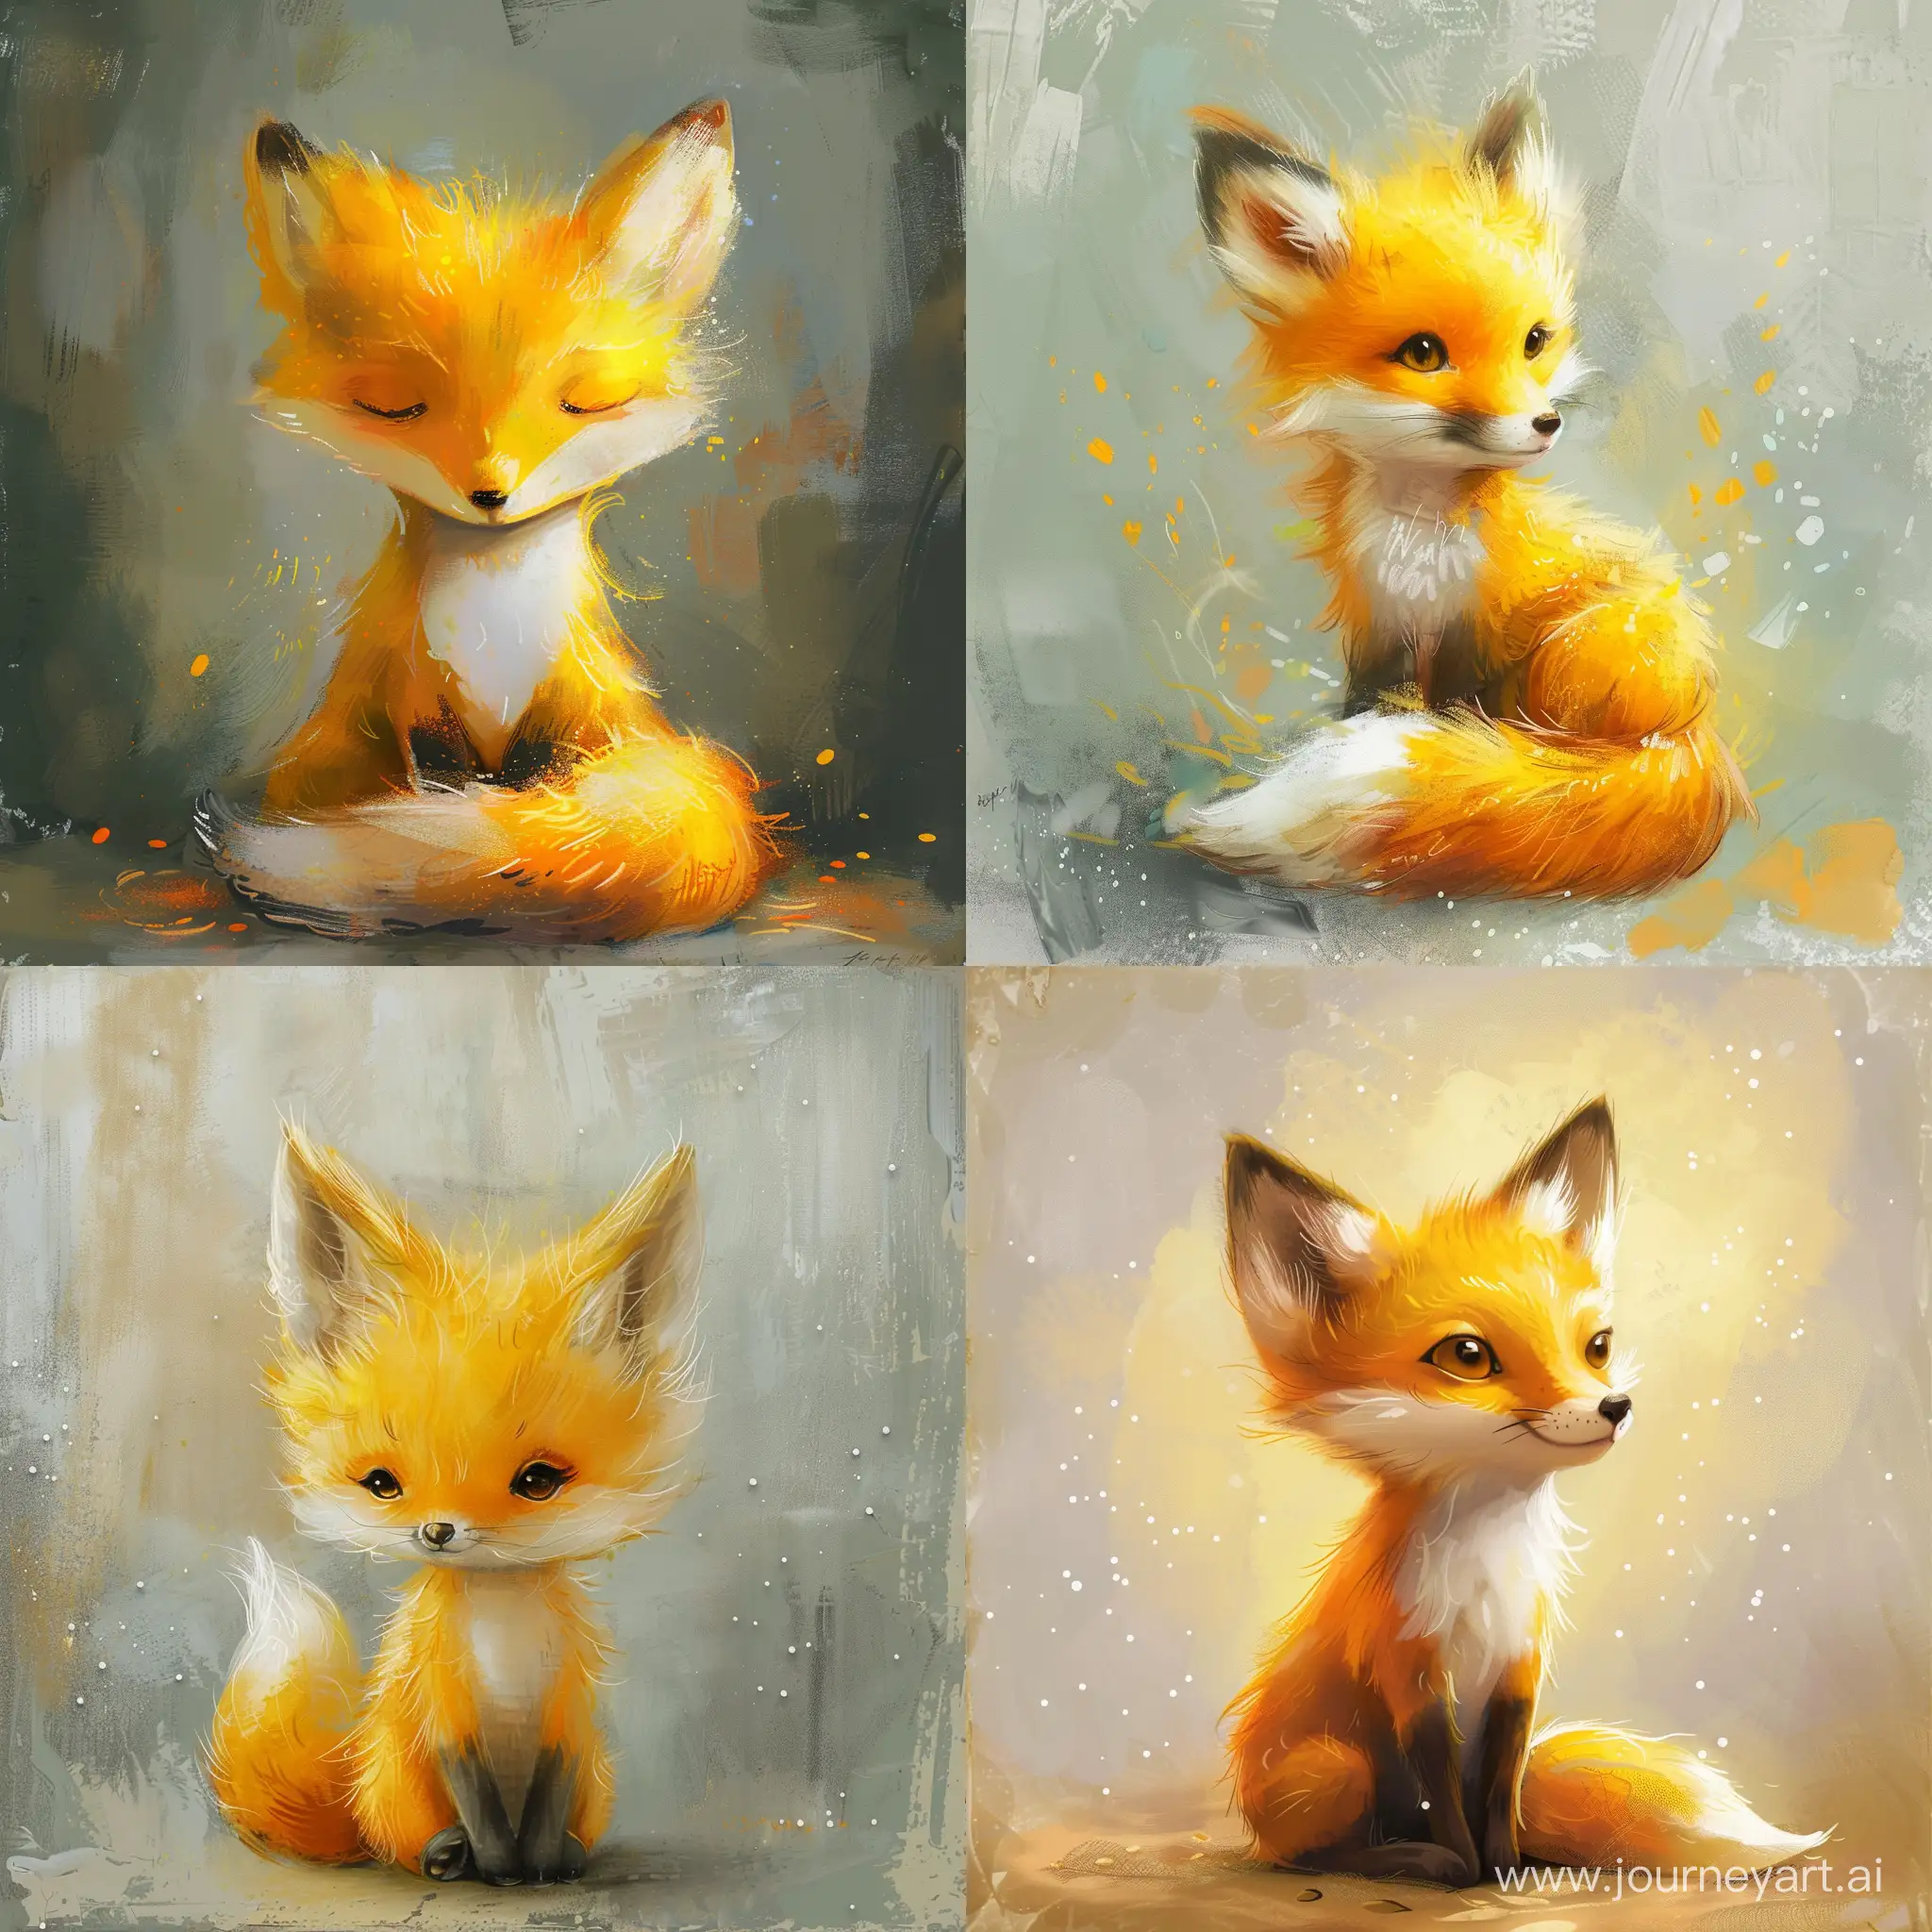 Adorable-Cartoon-Little-Fox-with-Yellow-Fur-in-a-Simple-and-Meticulous-Setting